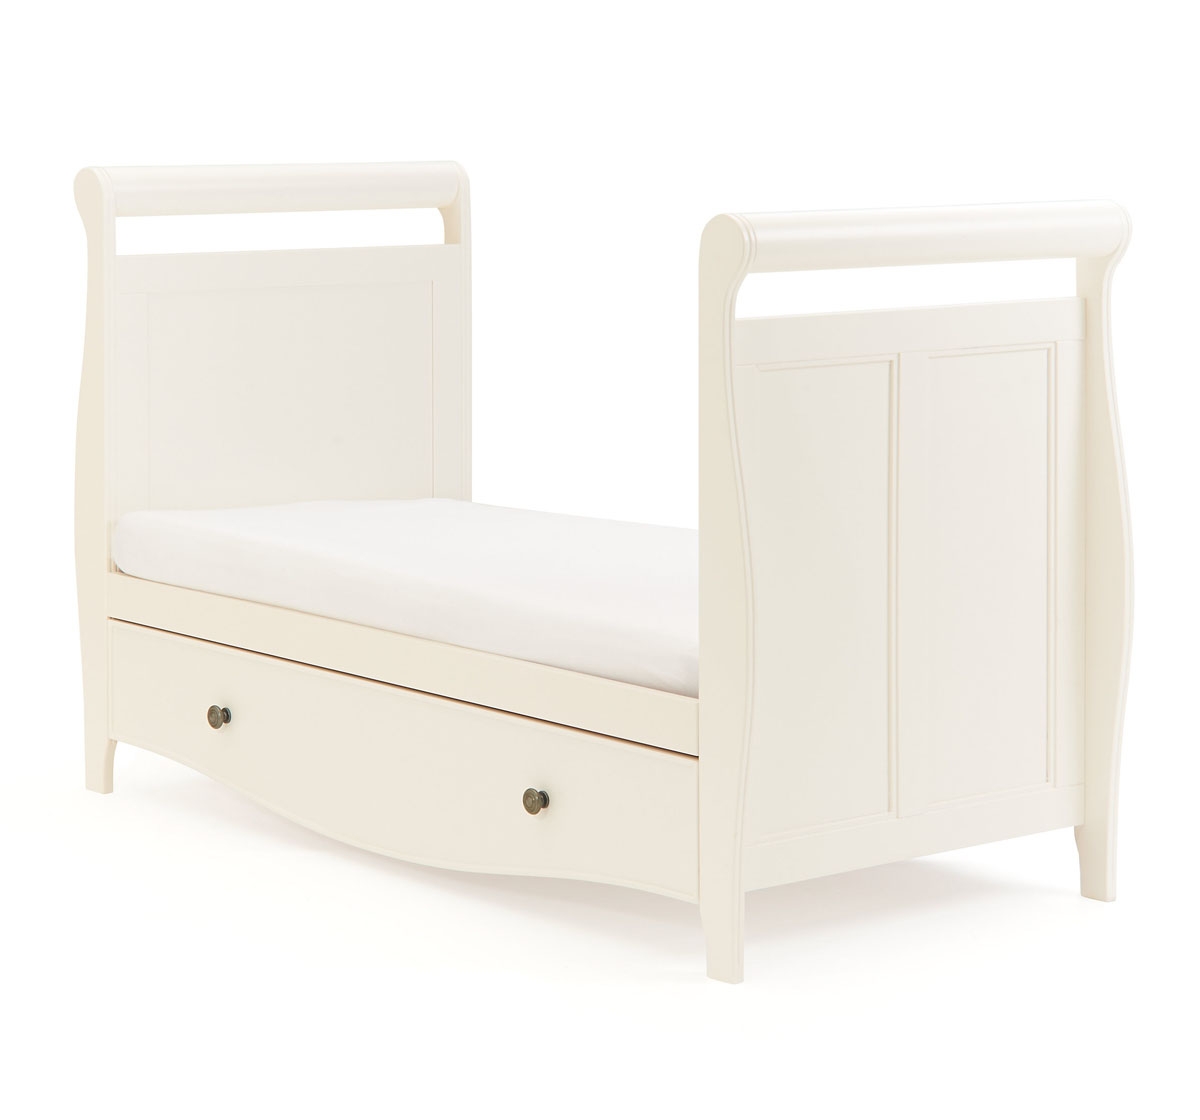 Mothercare | Mothercare Bloomsbury Cot Bed Ivory 7